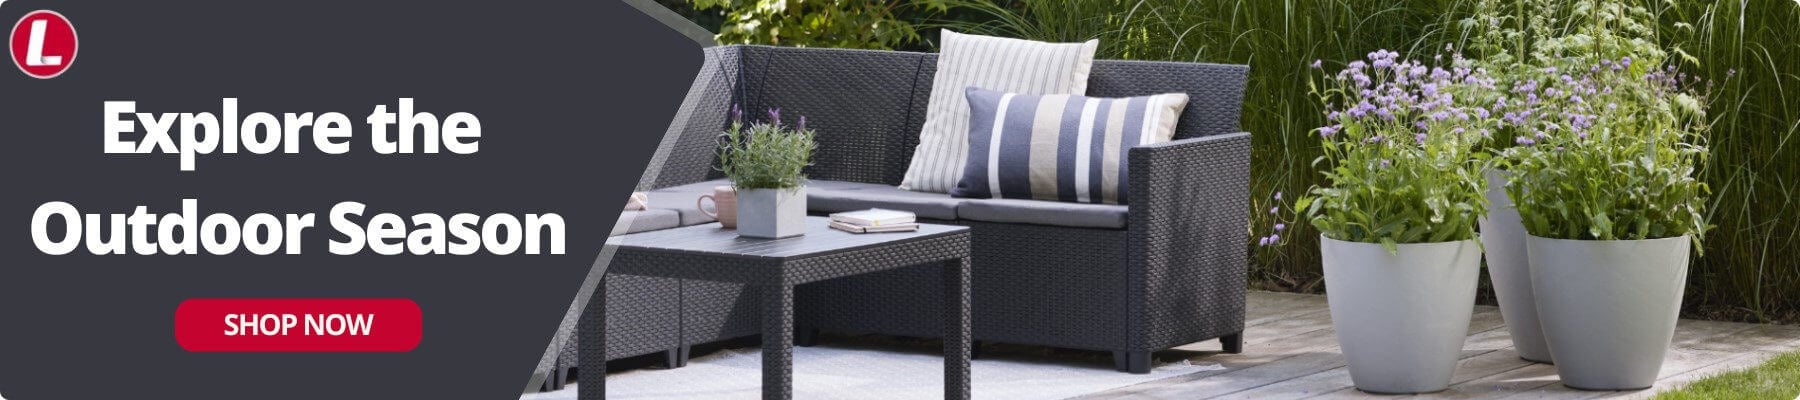 Outdoor Living at Lenehans.ie